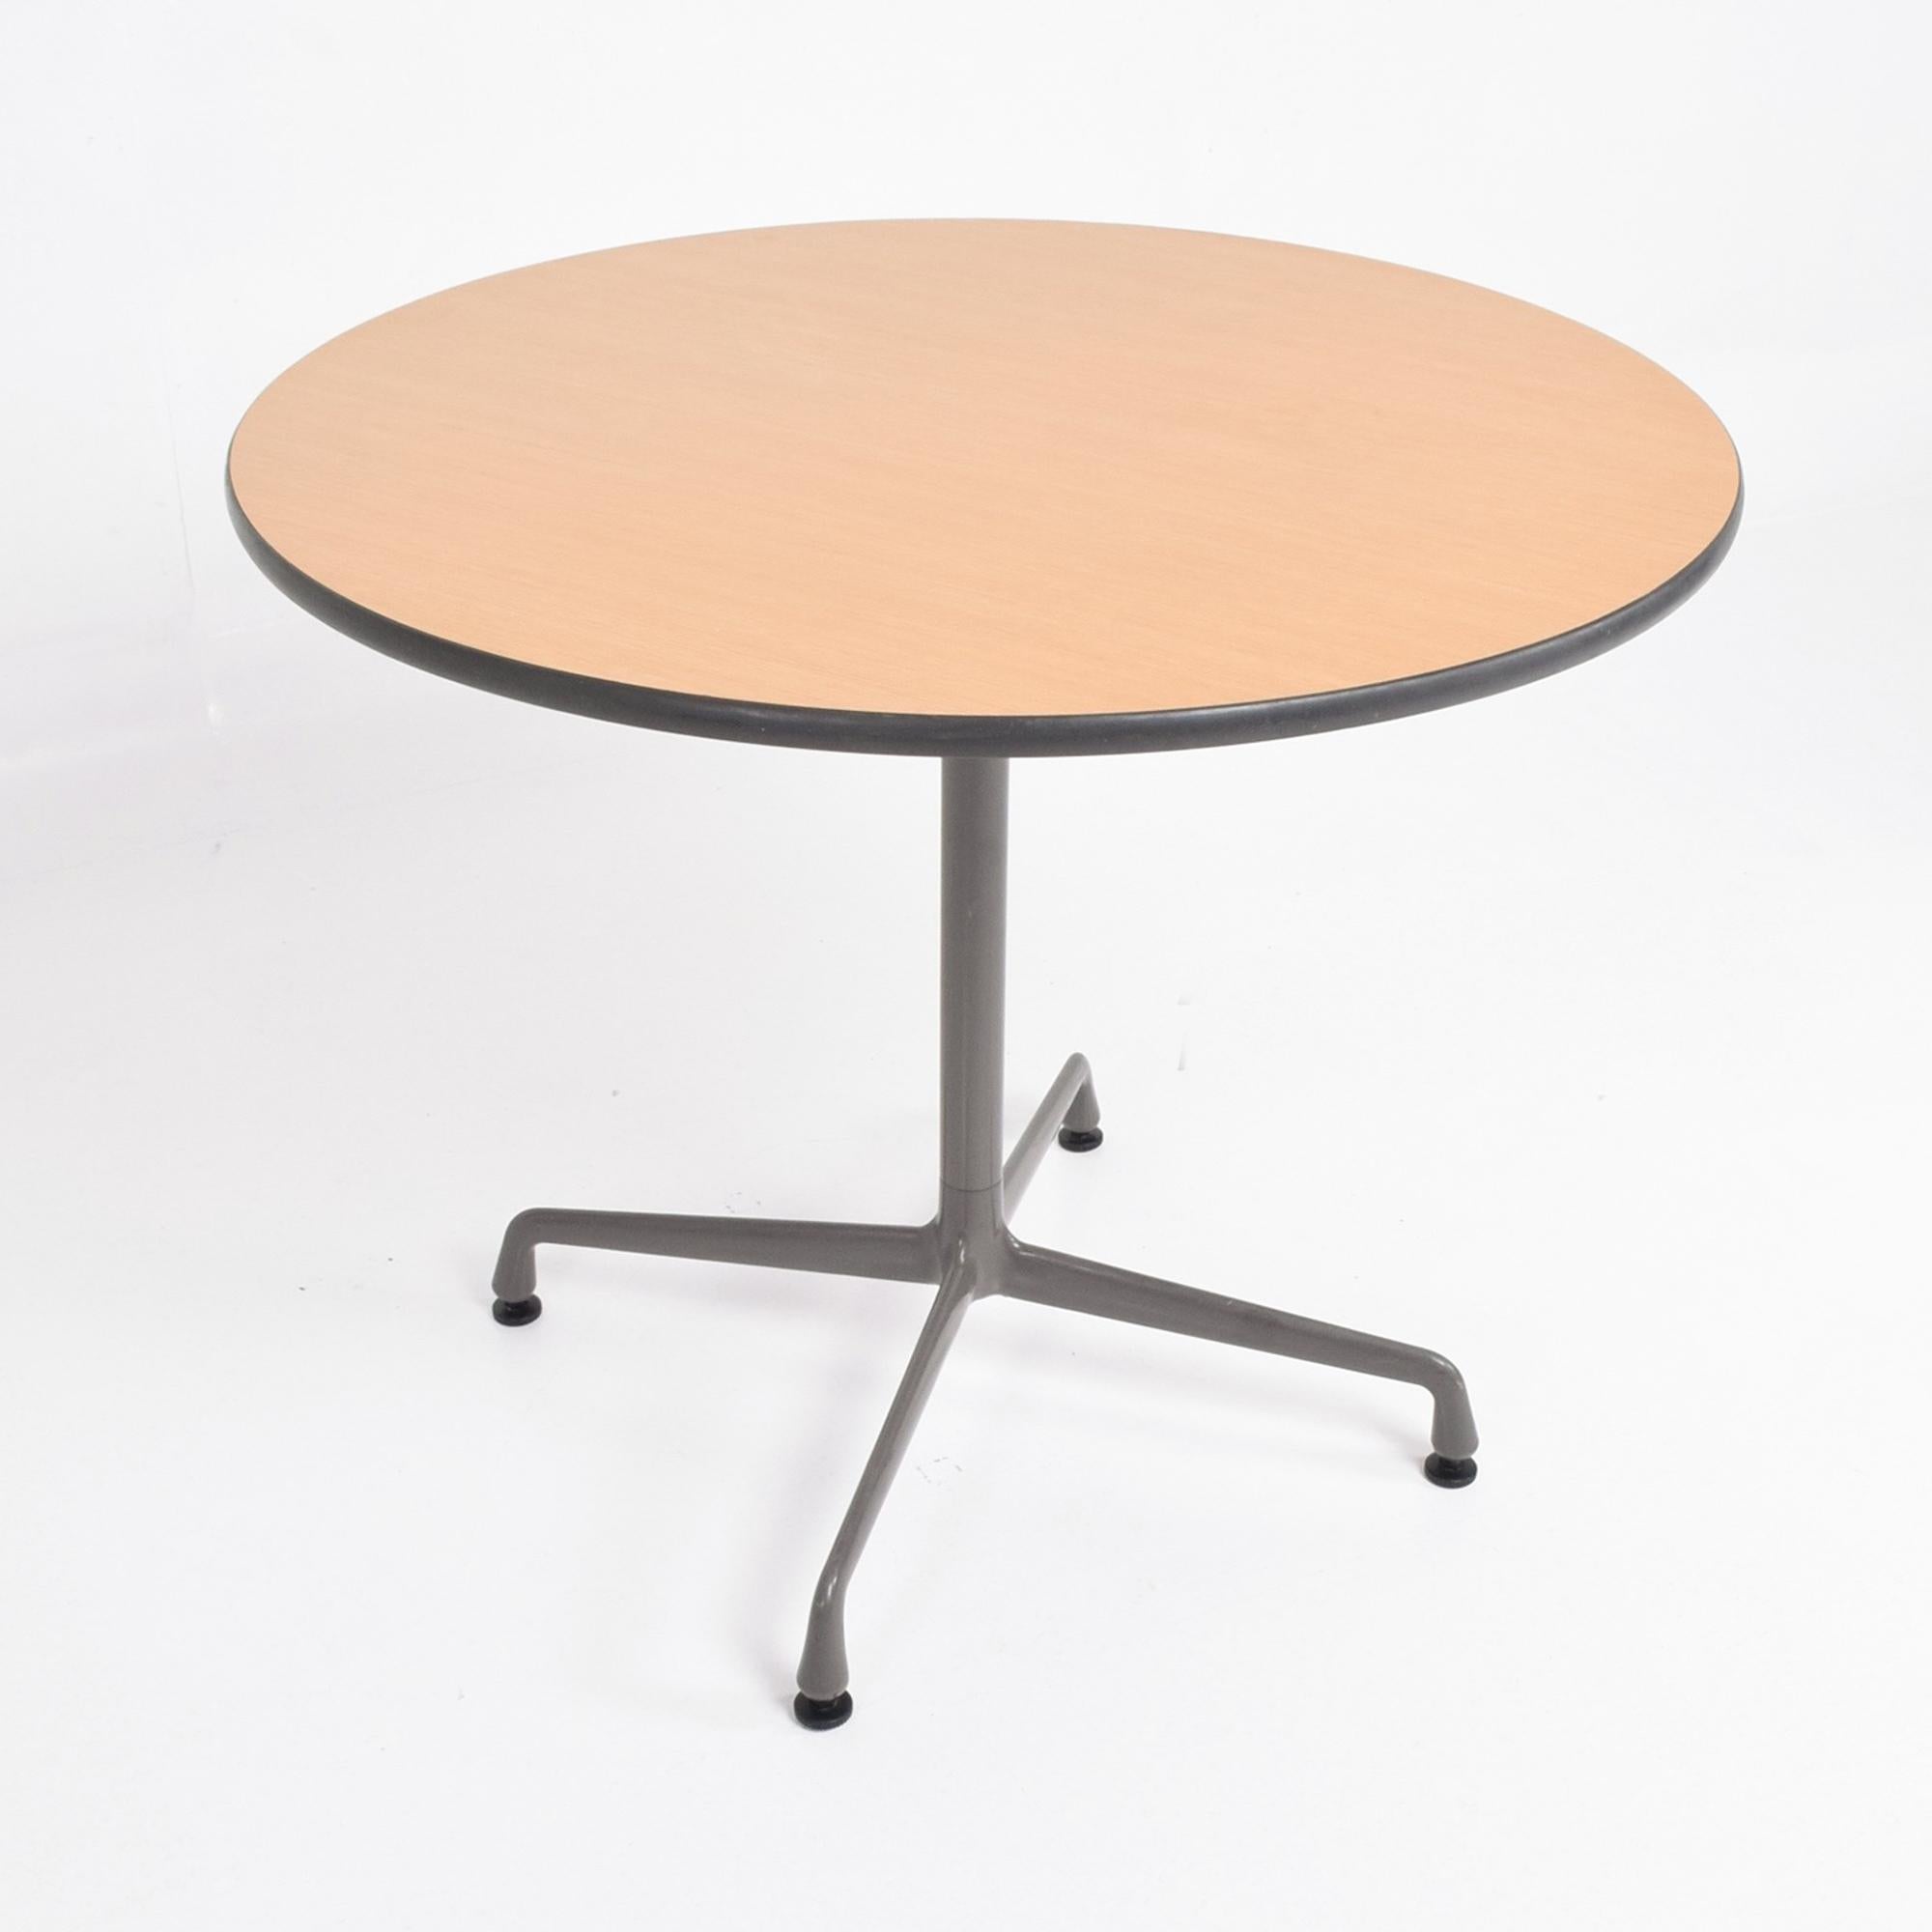 American Charles Eames Aluminum Group Small Round Office Table Herman Miller 1960s